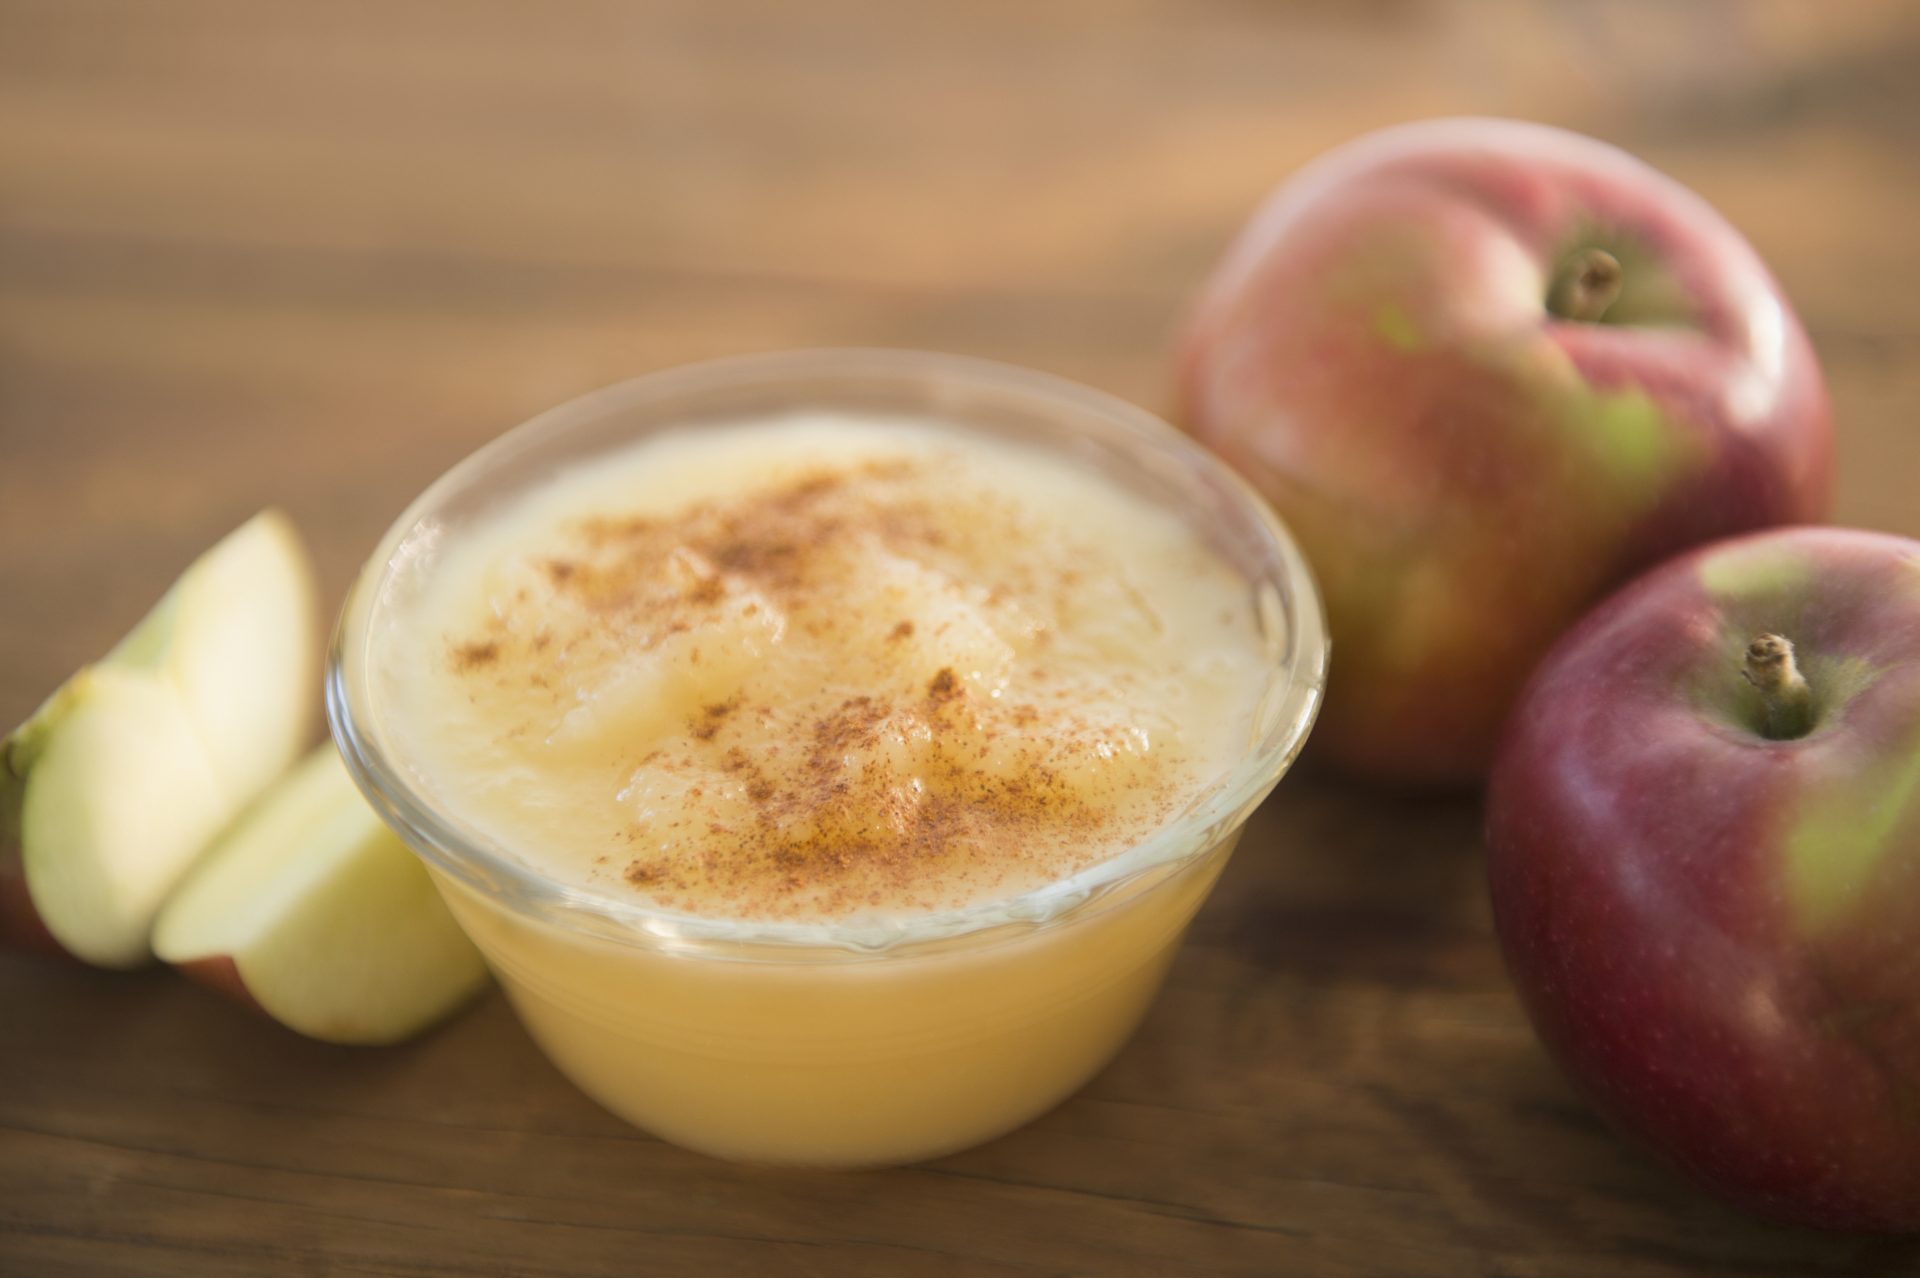 CDC Reports 22 Toddlers Ill After Eating Applesauce With Lead